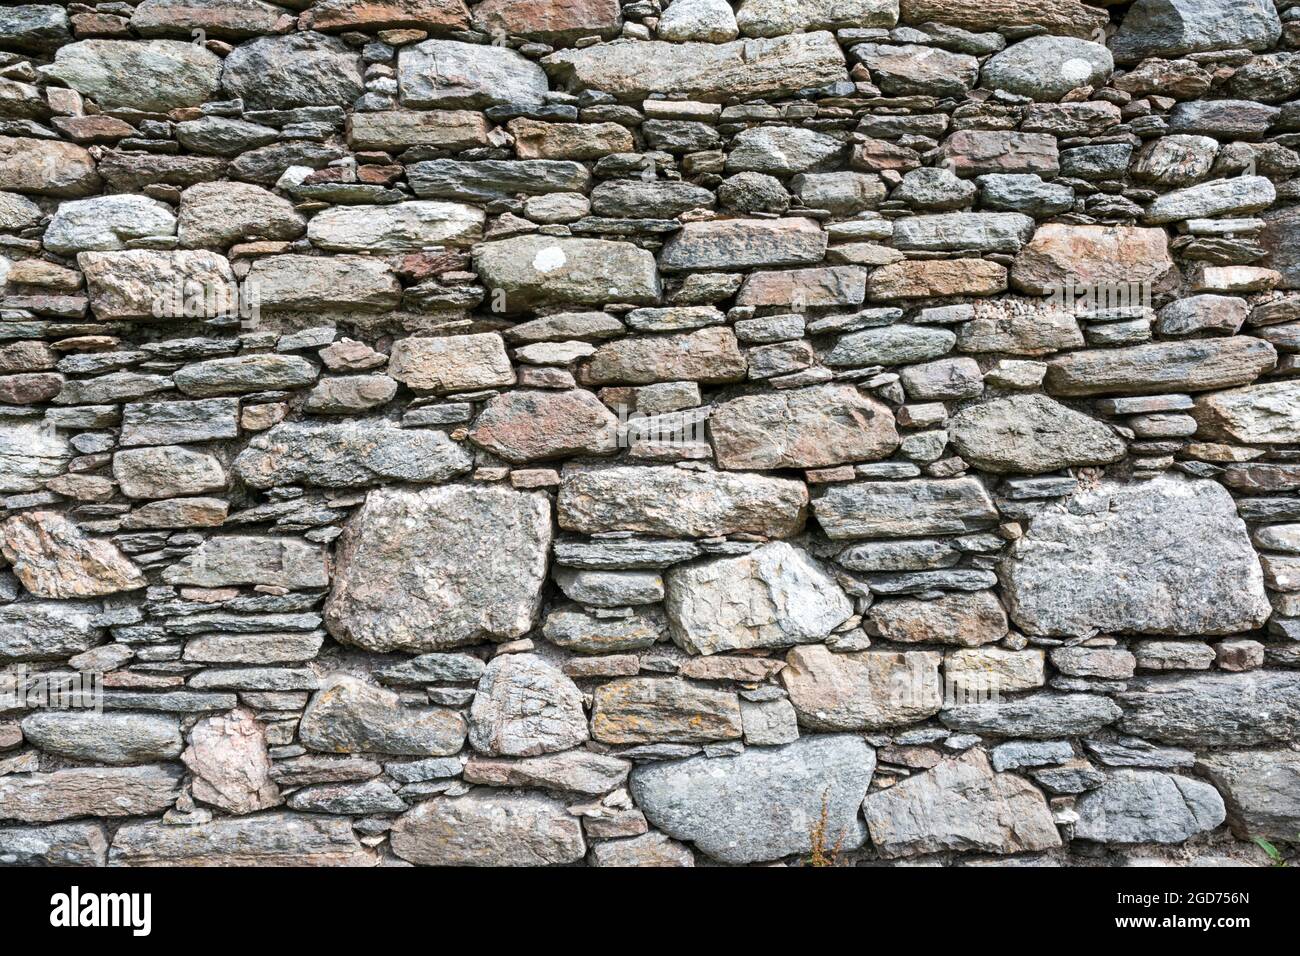 Different sizes of stone blocks in a wall. Stock Photo